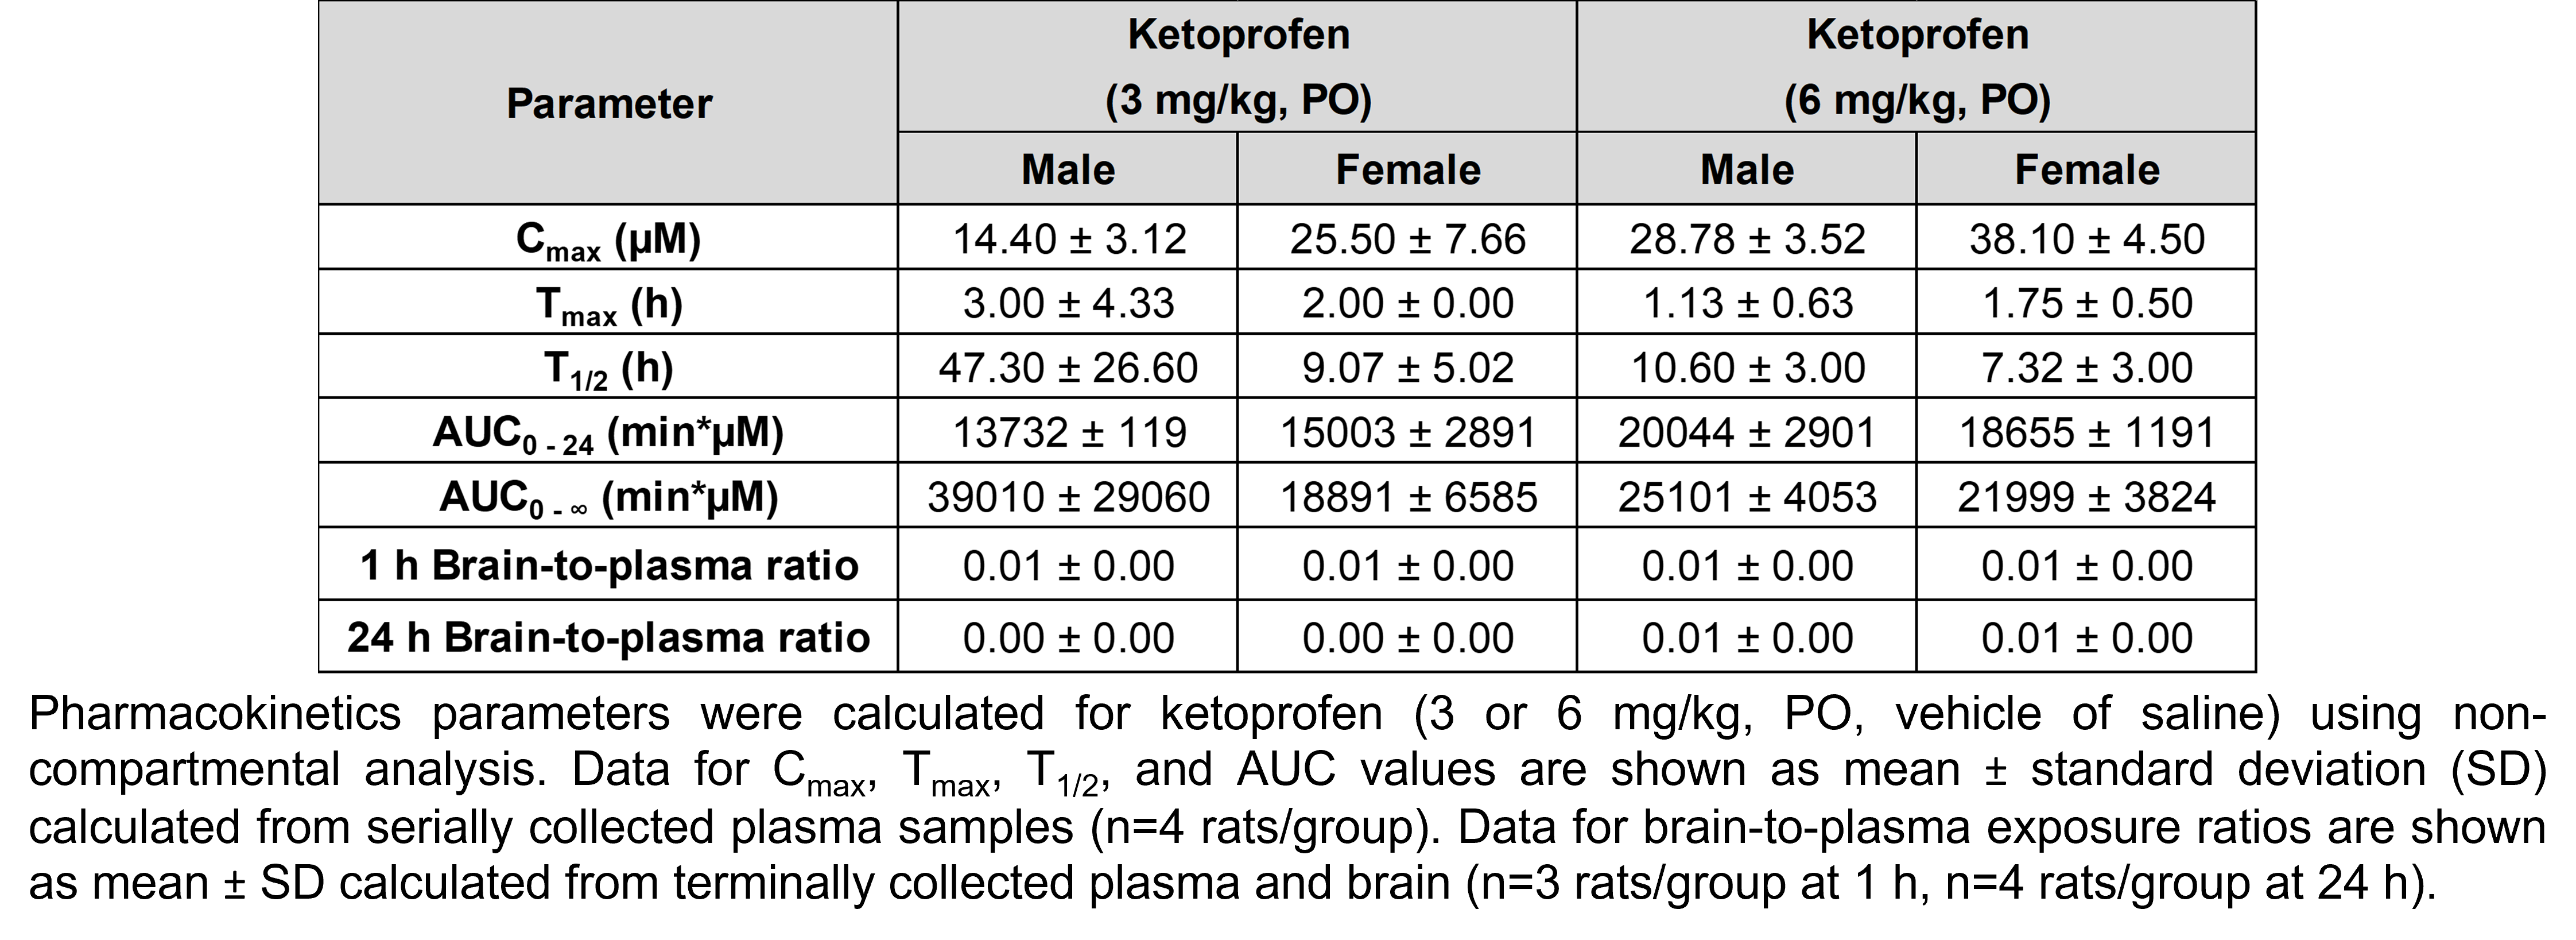 A table shows pharmacokinetics parameters calculated for ketoprofen using non-compartmental analysis in male and female rats treated with ketoprofen (3 or 6 mg/kg, PO, vehicle of saline). The means for the 4 groups (males and females treated with 3 mg/kg ketoprofen and males and females treated with 6 mg/kg ketoprofen, respectively) are as follows. The highest concentration (Cmax) was 14.4, 25.5, 28.78, and 38.1 µM; the time at the maximum concentration (Tmax) was 3, 2, 1.13, and 1.75 hours; the half-life (T1/2) was 47.3, 9.07, 10.6, and 7.32 hours; area under the curve for time 0 to 24 hours was 13732, 15003, 20044, and 18655 minutes*µM; area under the curve for time 0 to infinity was 39010, 18891, 25101, and 21999 minutes*µM; the brain-to-plasma ratio at 1 hour was 0.01 for all groups; the brain-to-plasma ratio at 24 hours was 0 for 3 mg/kg groups and 0.01 for 6 mg/kg groups